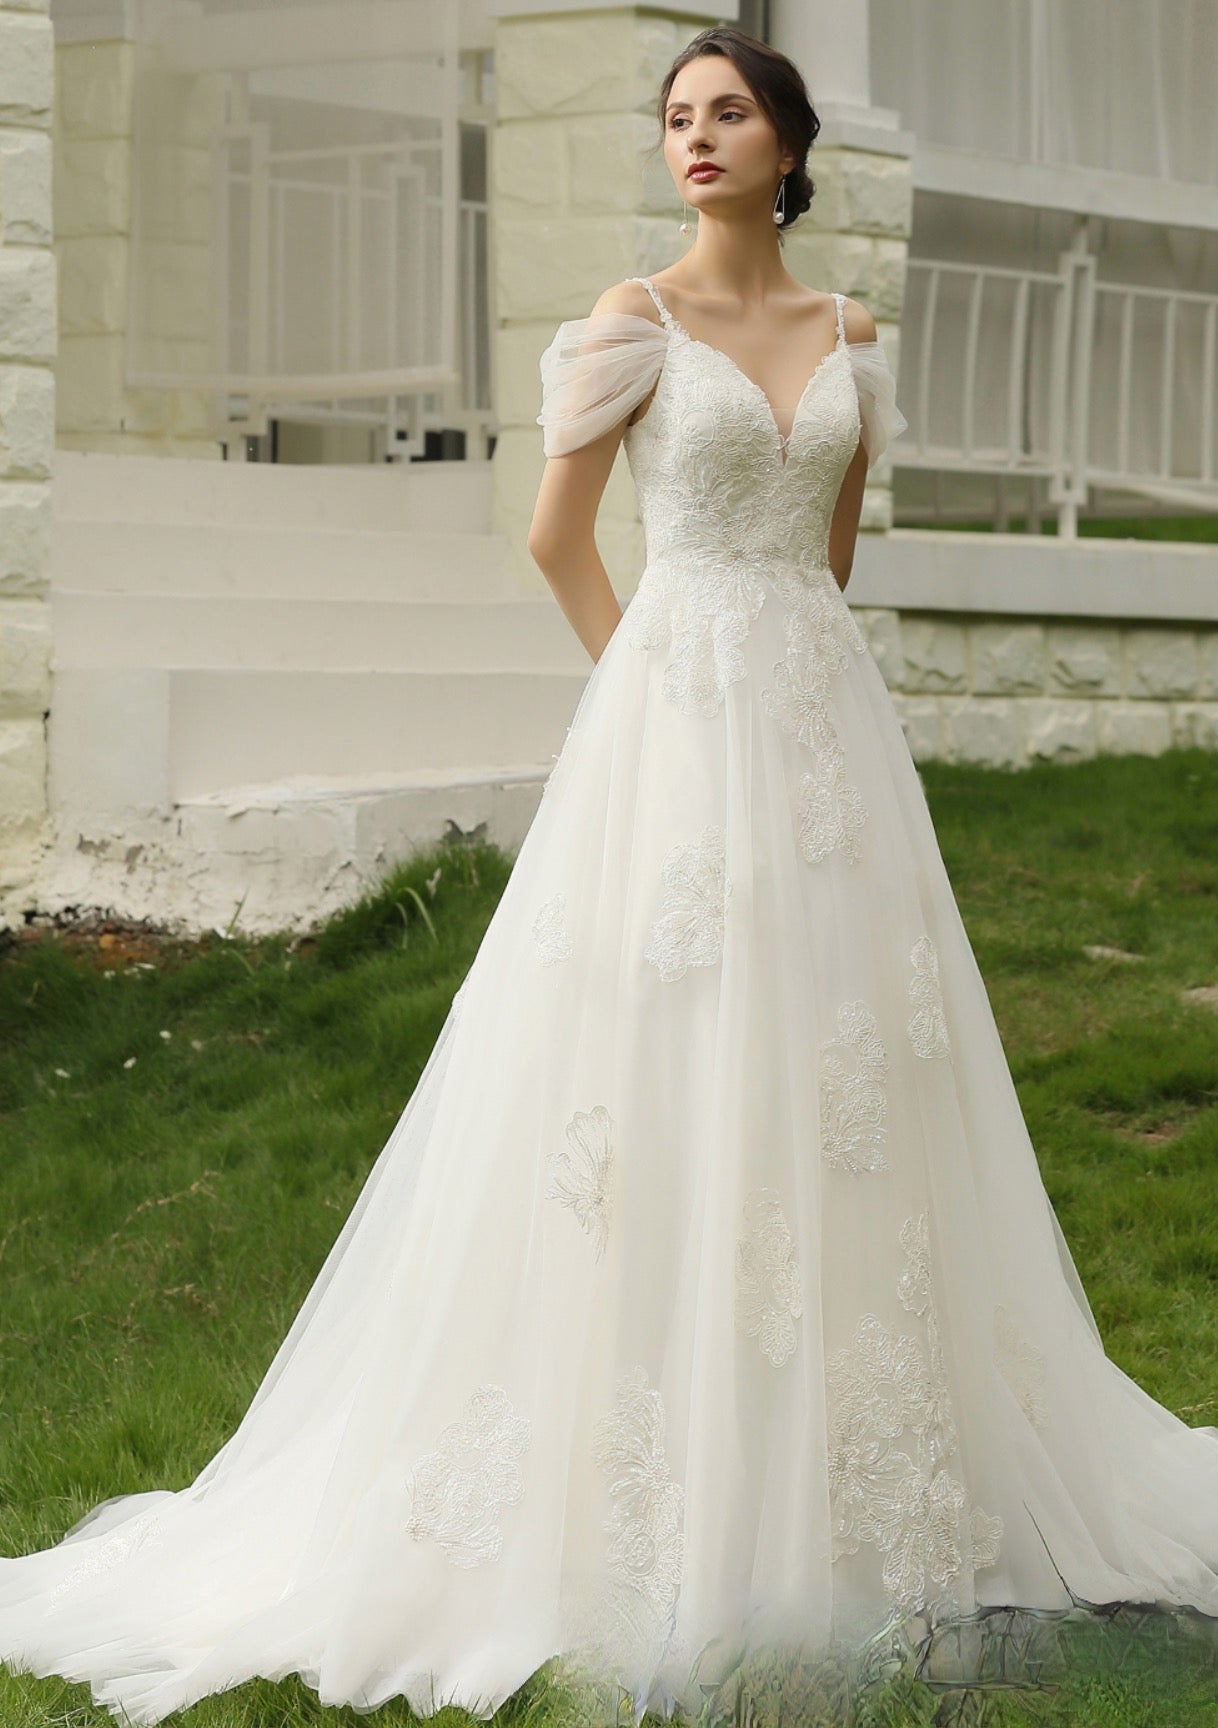 Romantic Glittery Lace Bridal Gown With Detachable Straps